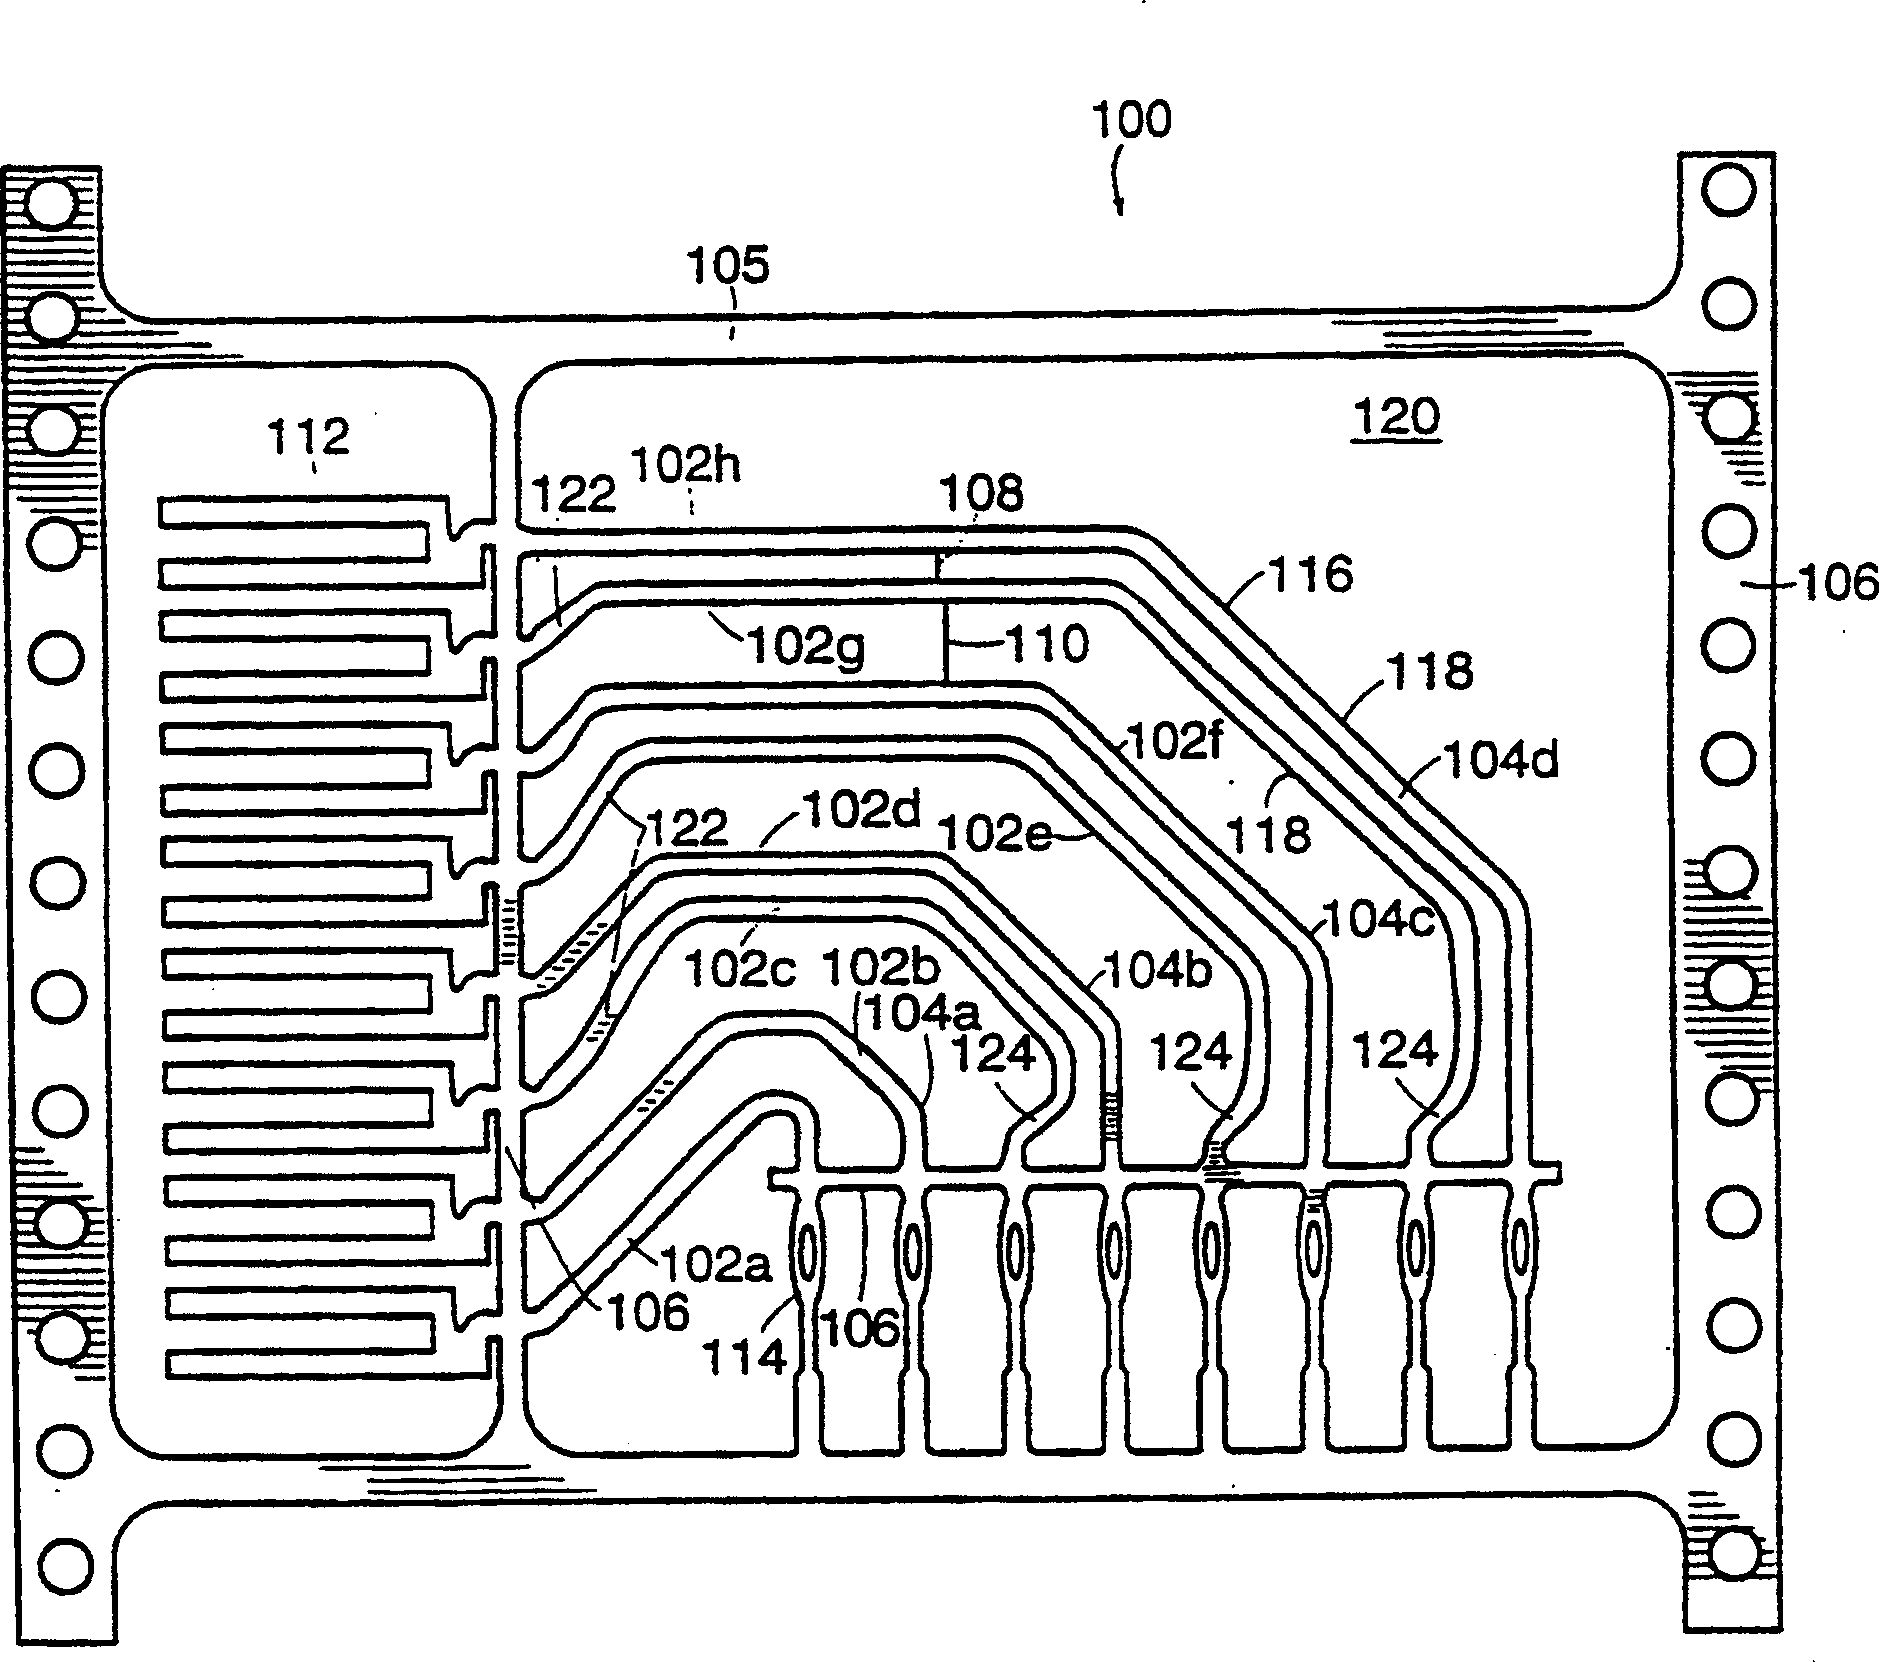 Differential signal electrical connectors